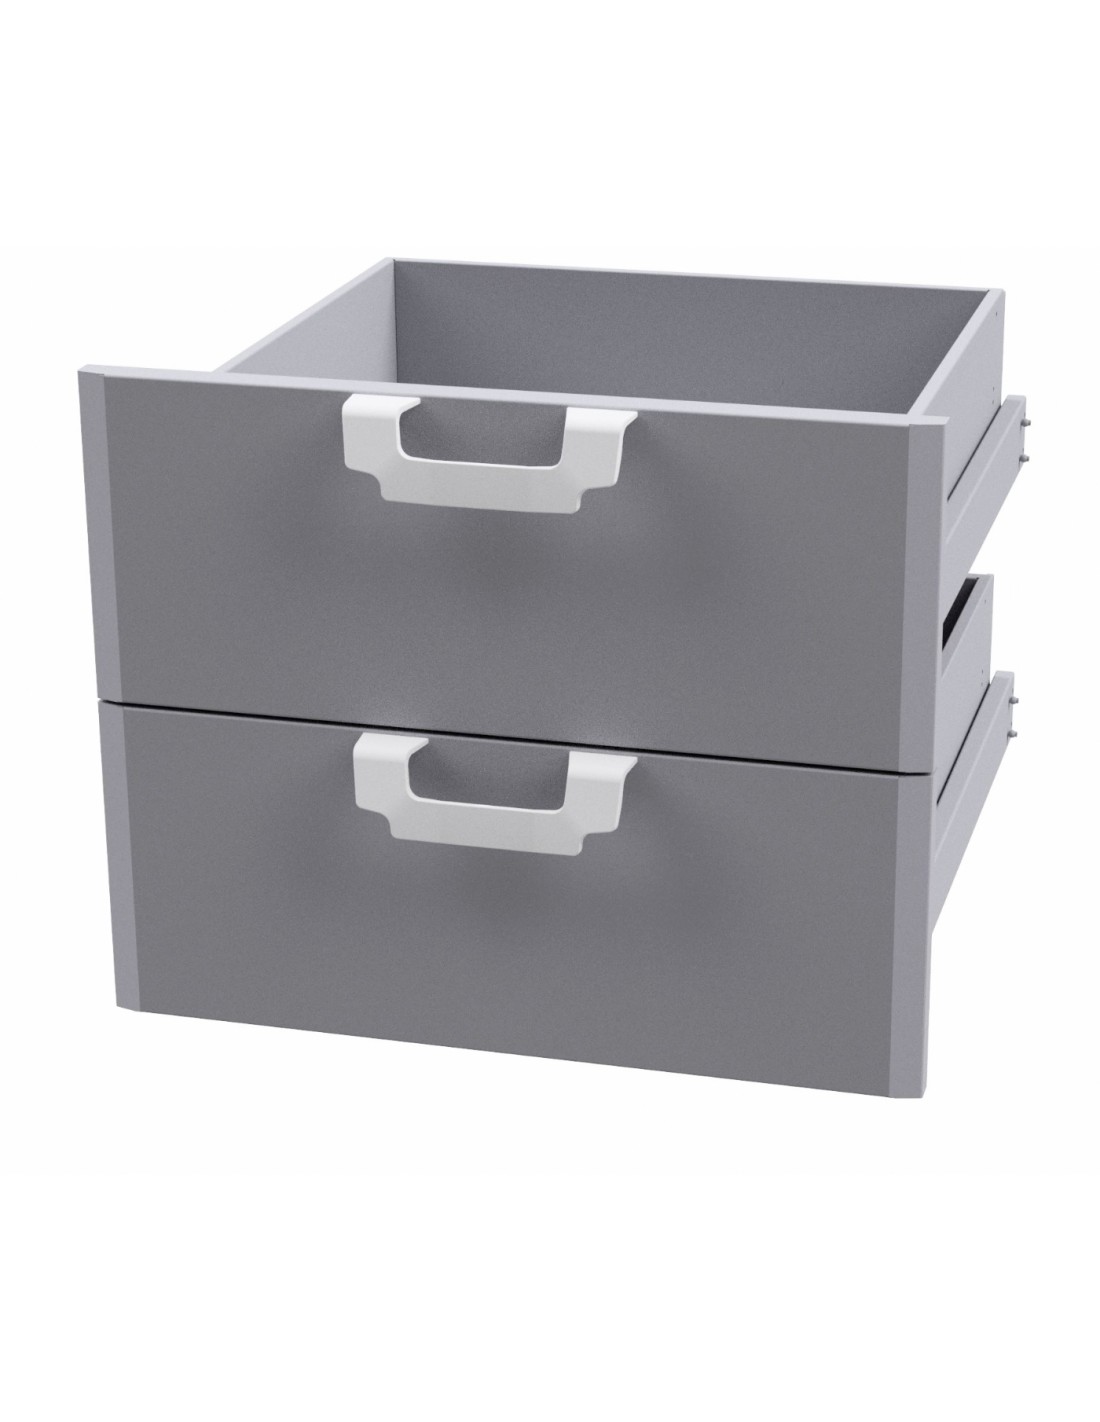 Cassettiera 300/400/600 - N. 2 drawers with stainless steel tub telescopic guides - Dimensions cm. 59,5x 51x 47